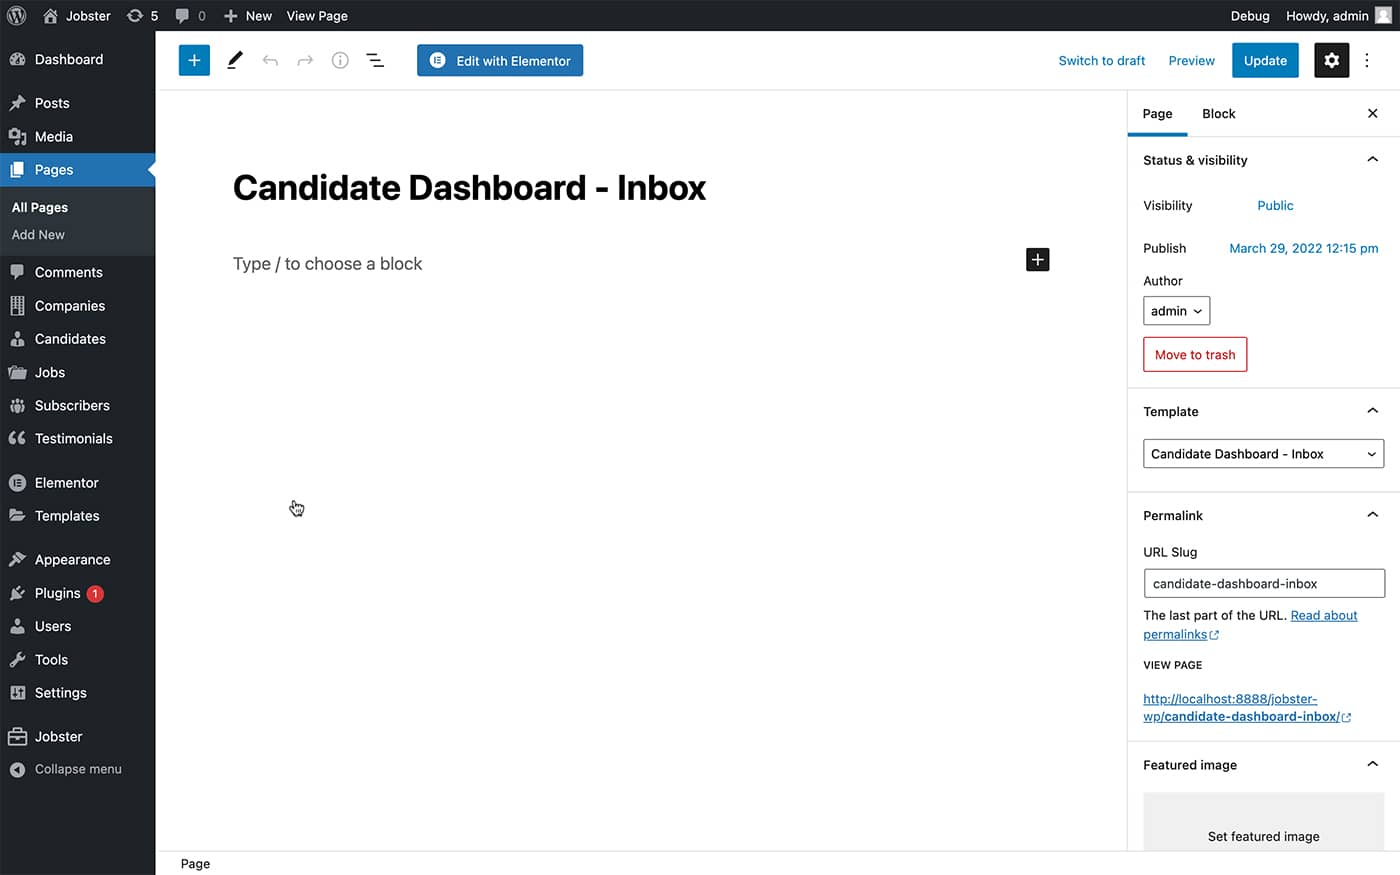 Jobster candidate dashboard inbox page template